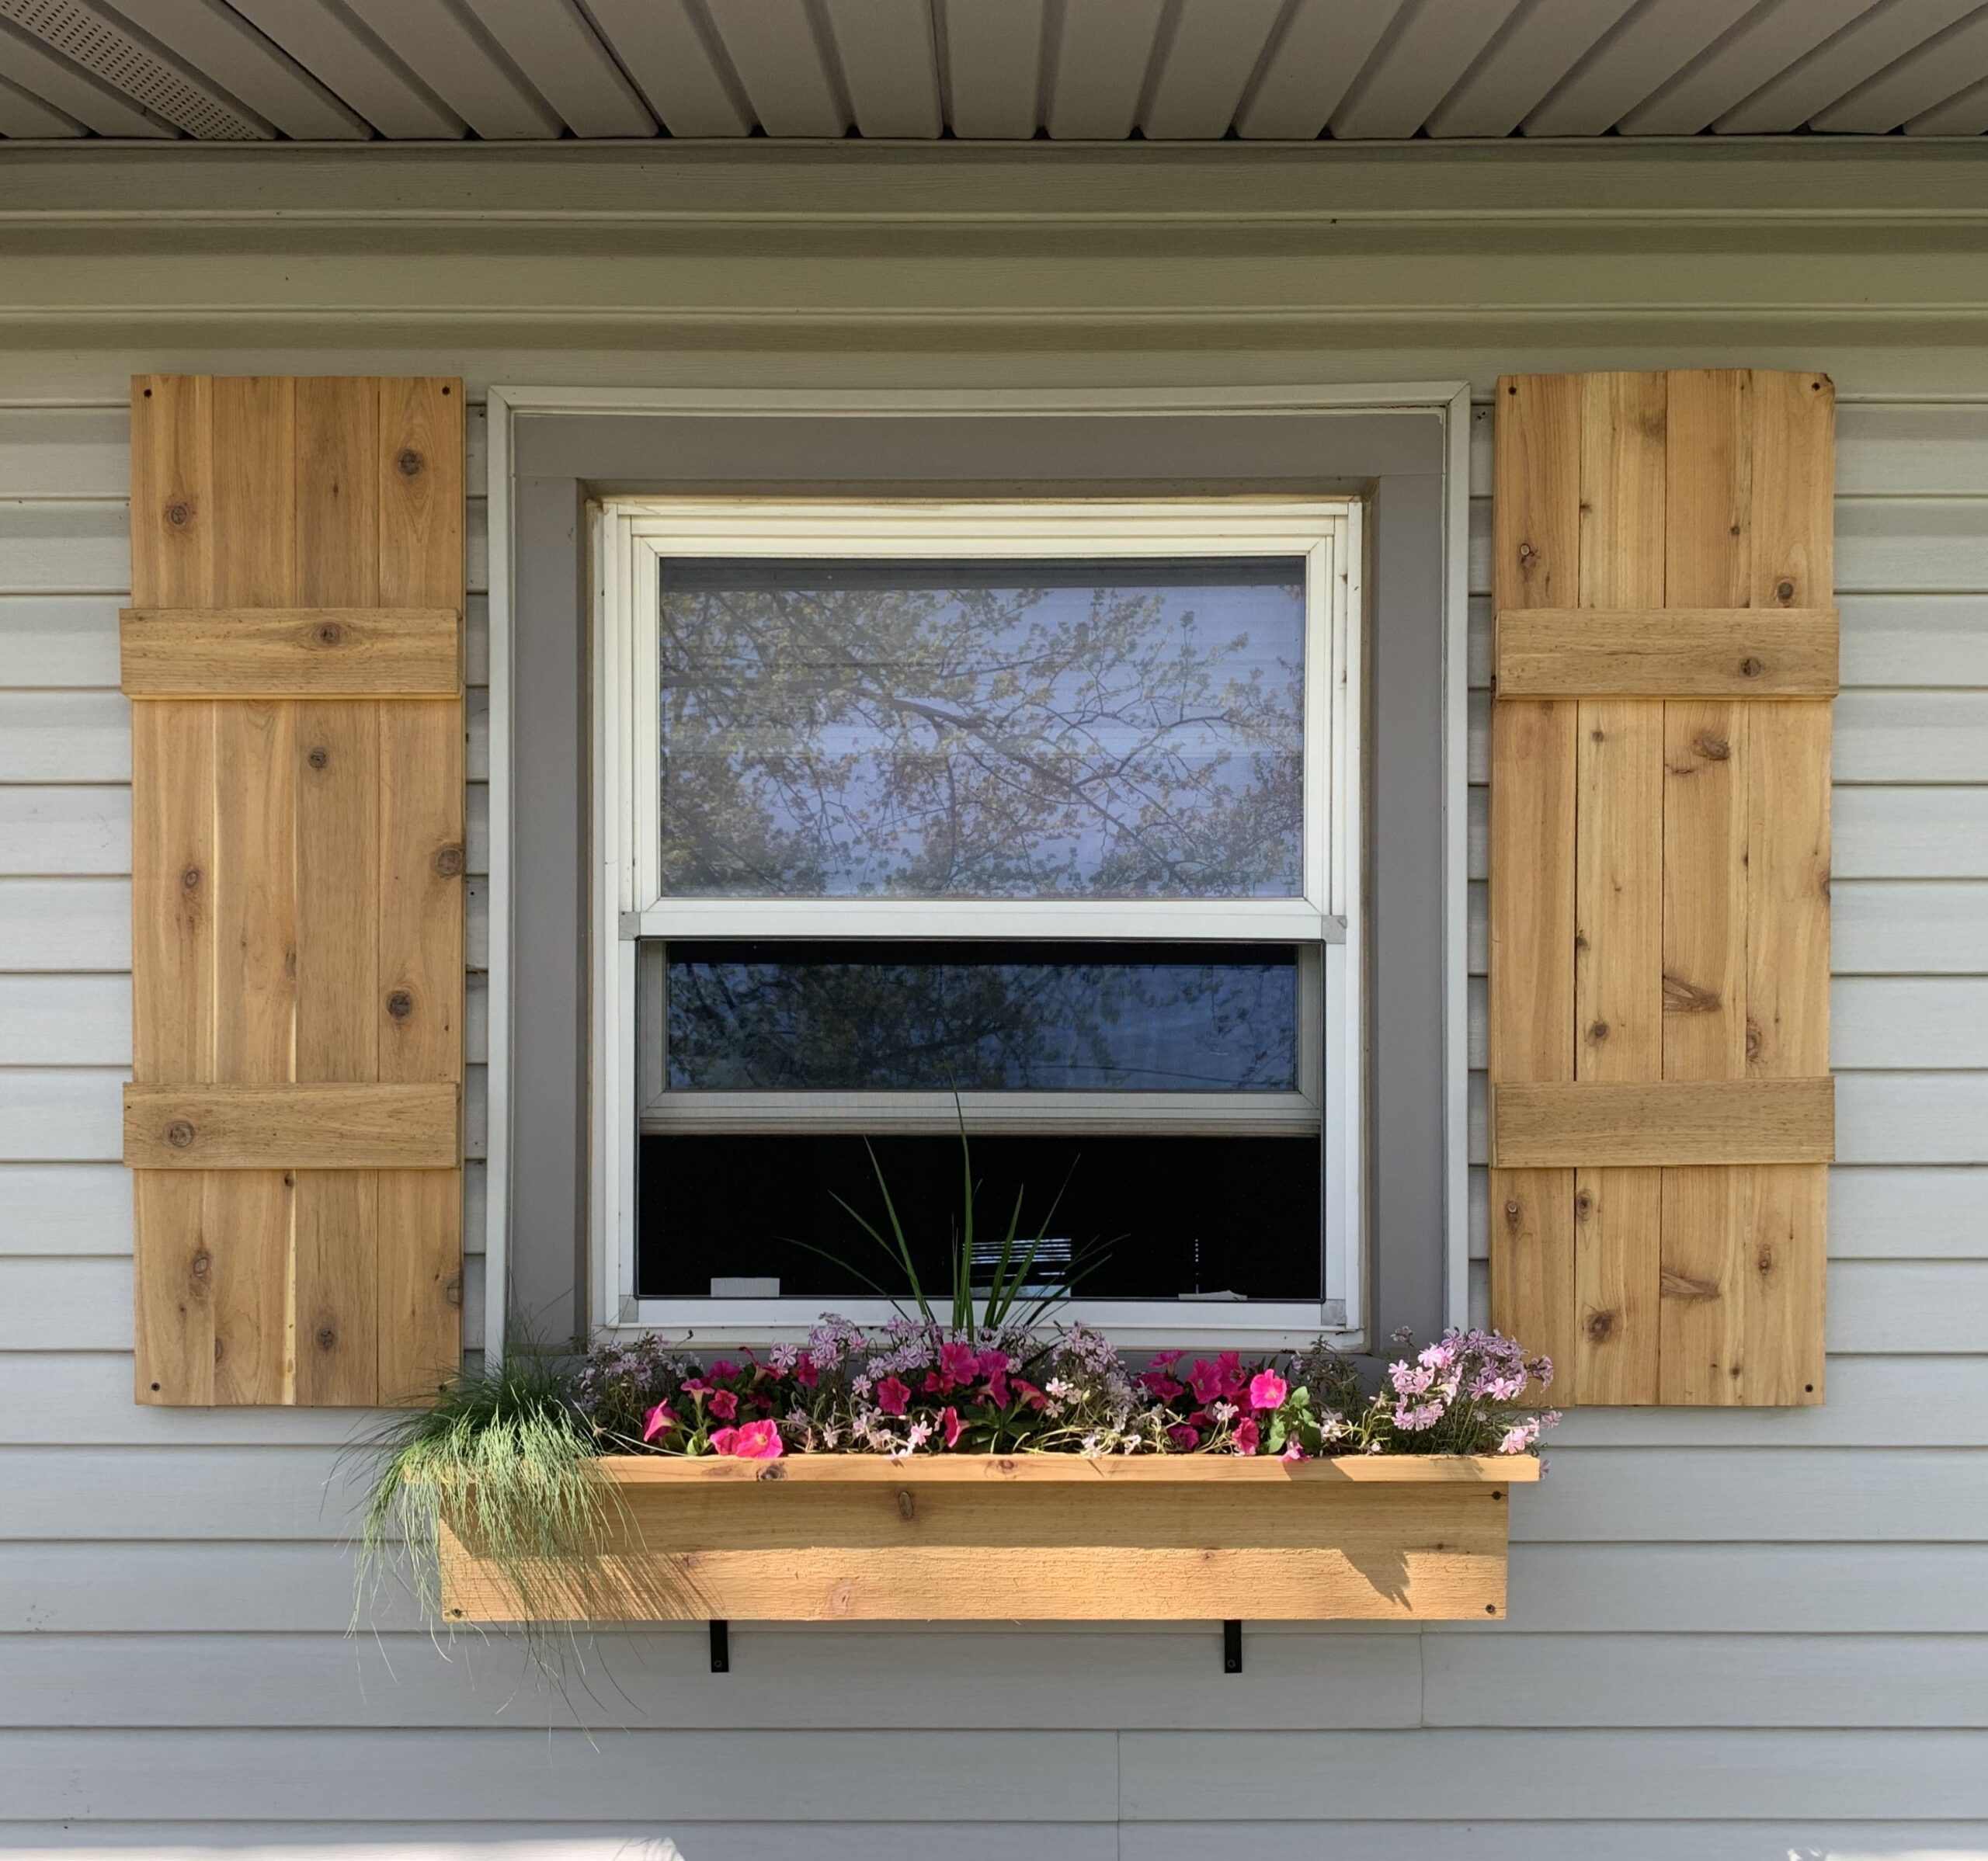 How to Choose the Right Cedar Shutters
for Your Home